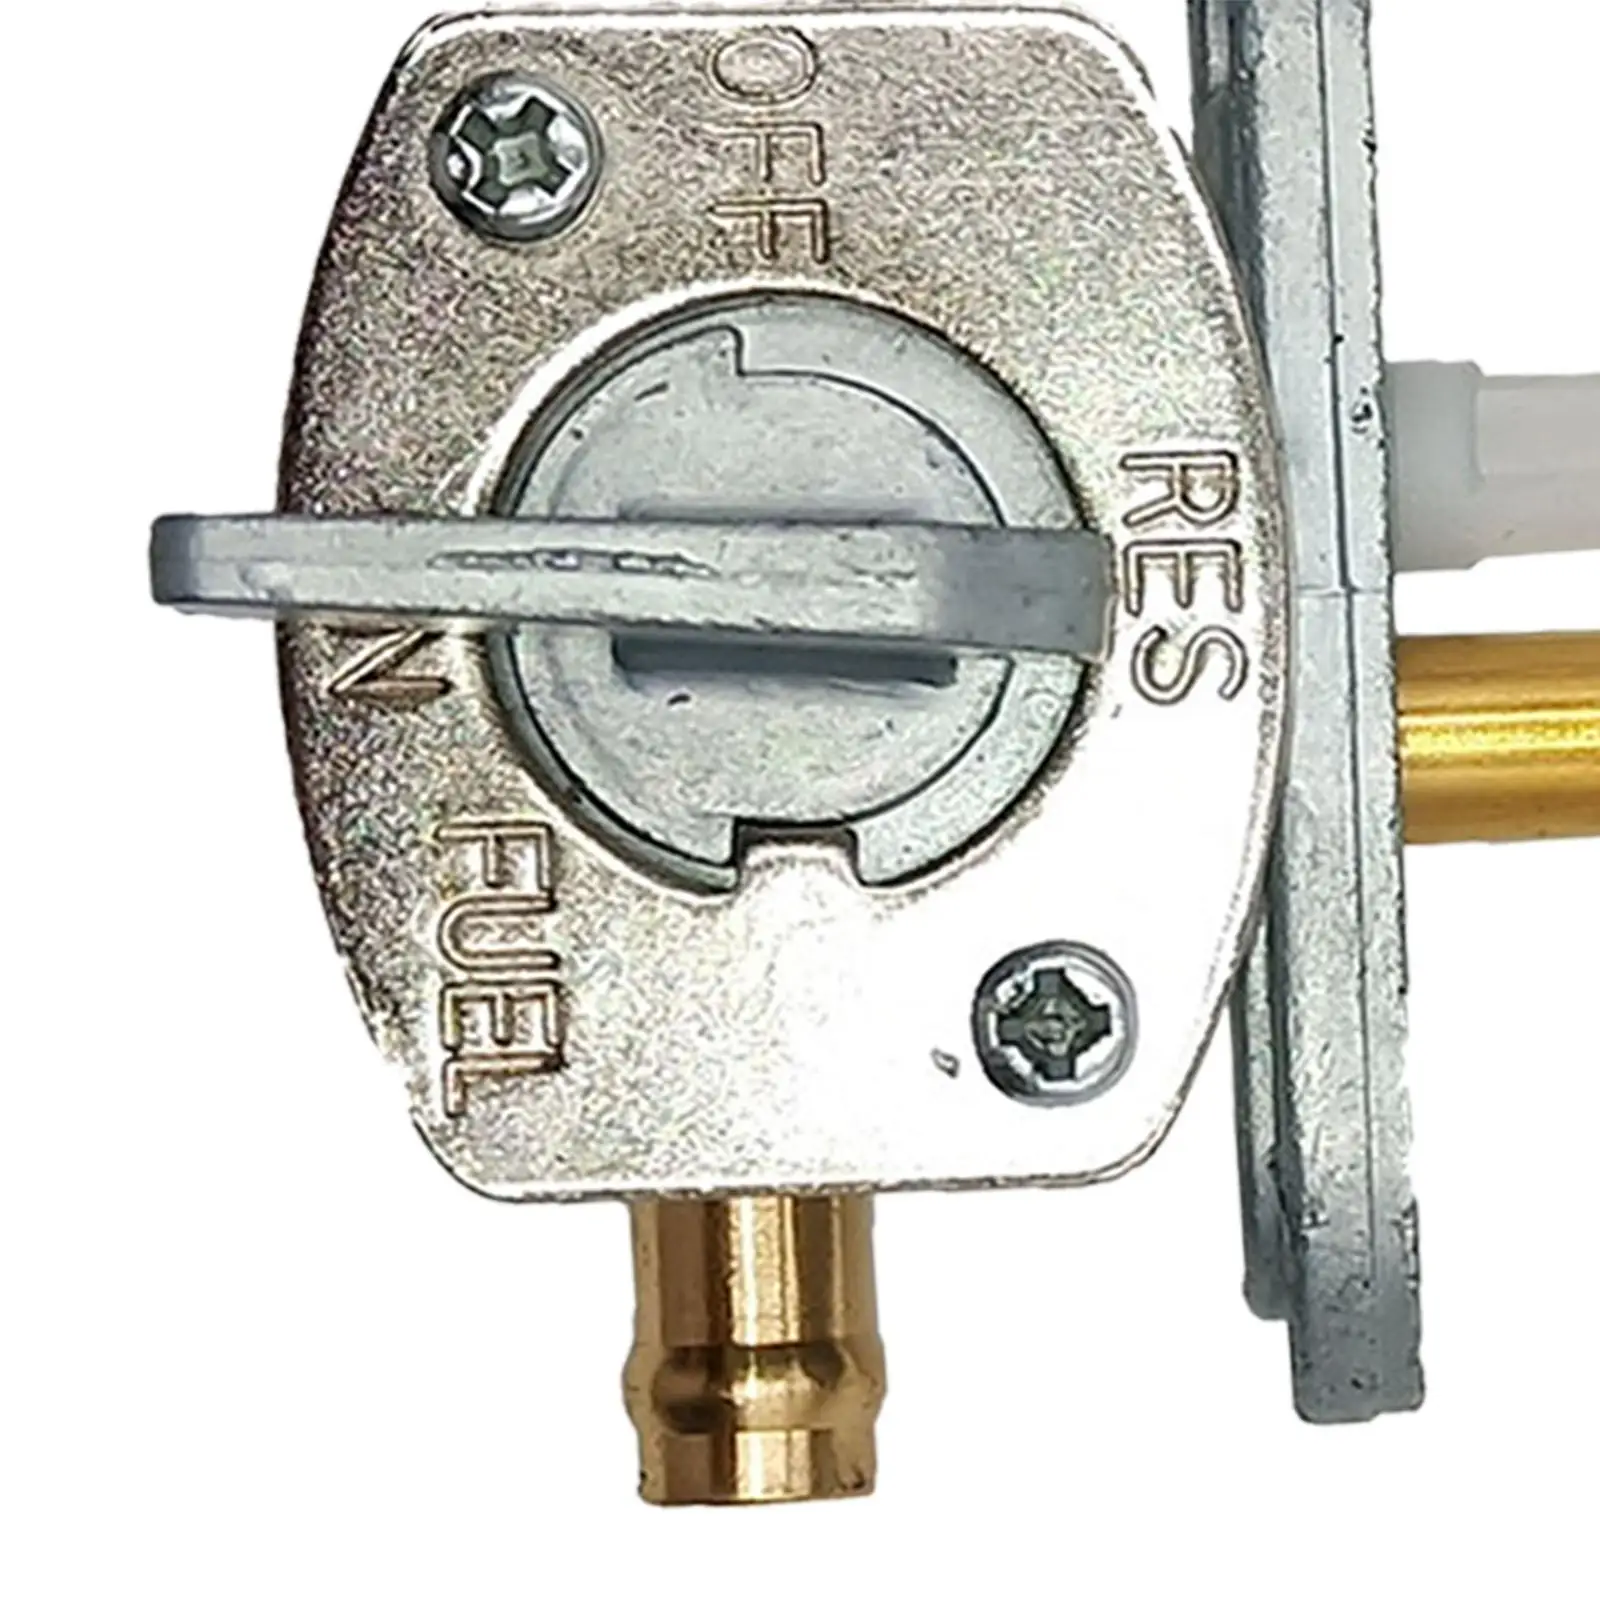 Replace 2Gu-24500-02 Fuel Cock Tap Petcock Valve Replacement for 300 400L Big Advanced manufacturing technology